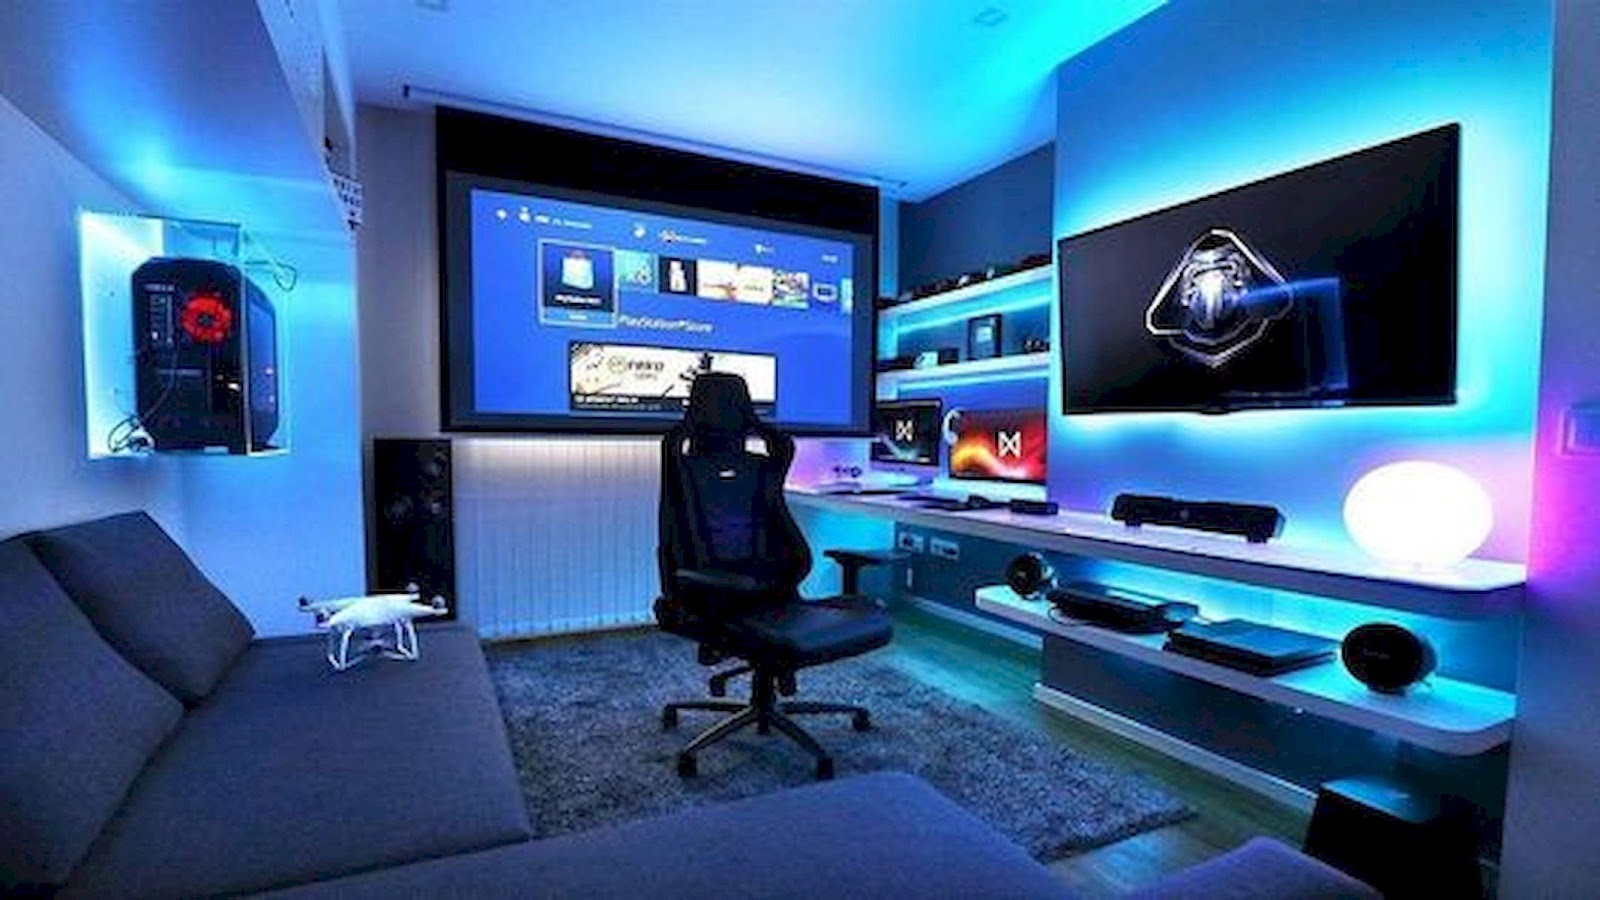 10 Creative Gaming Room Ideas For Small Rooms - scholarlyoa.com